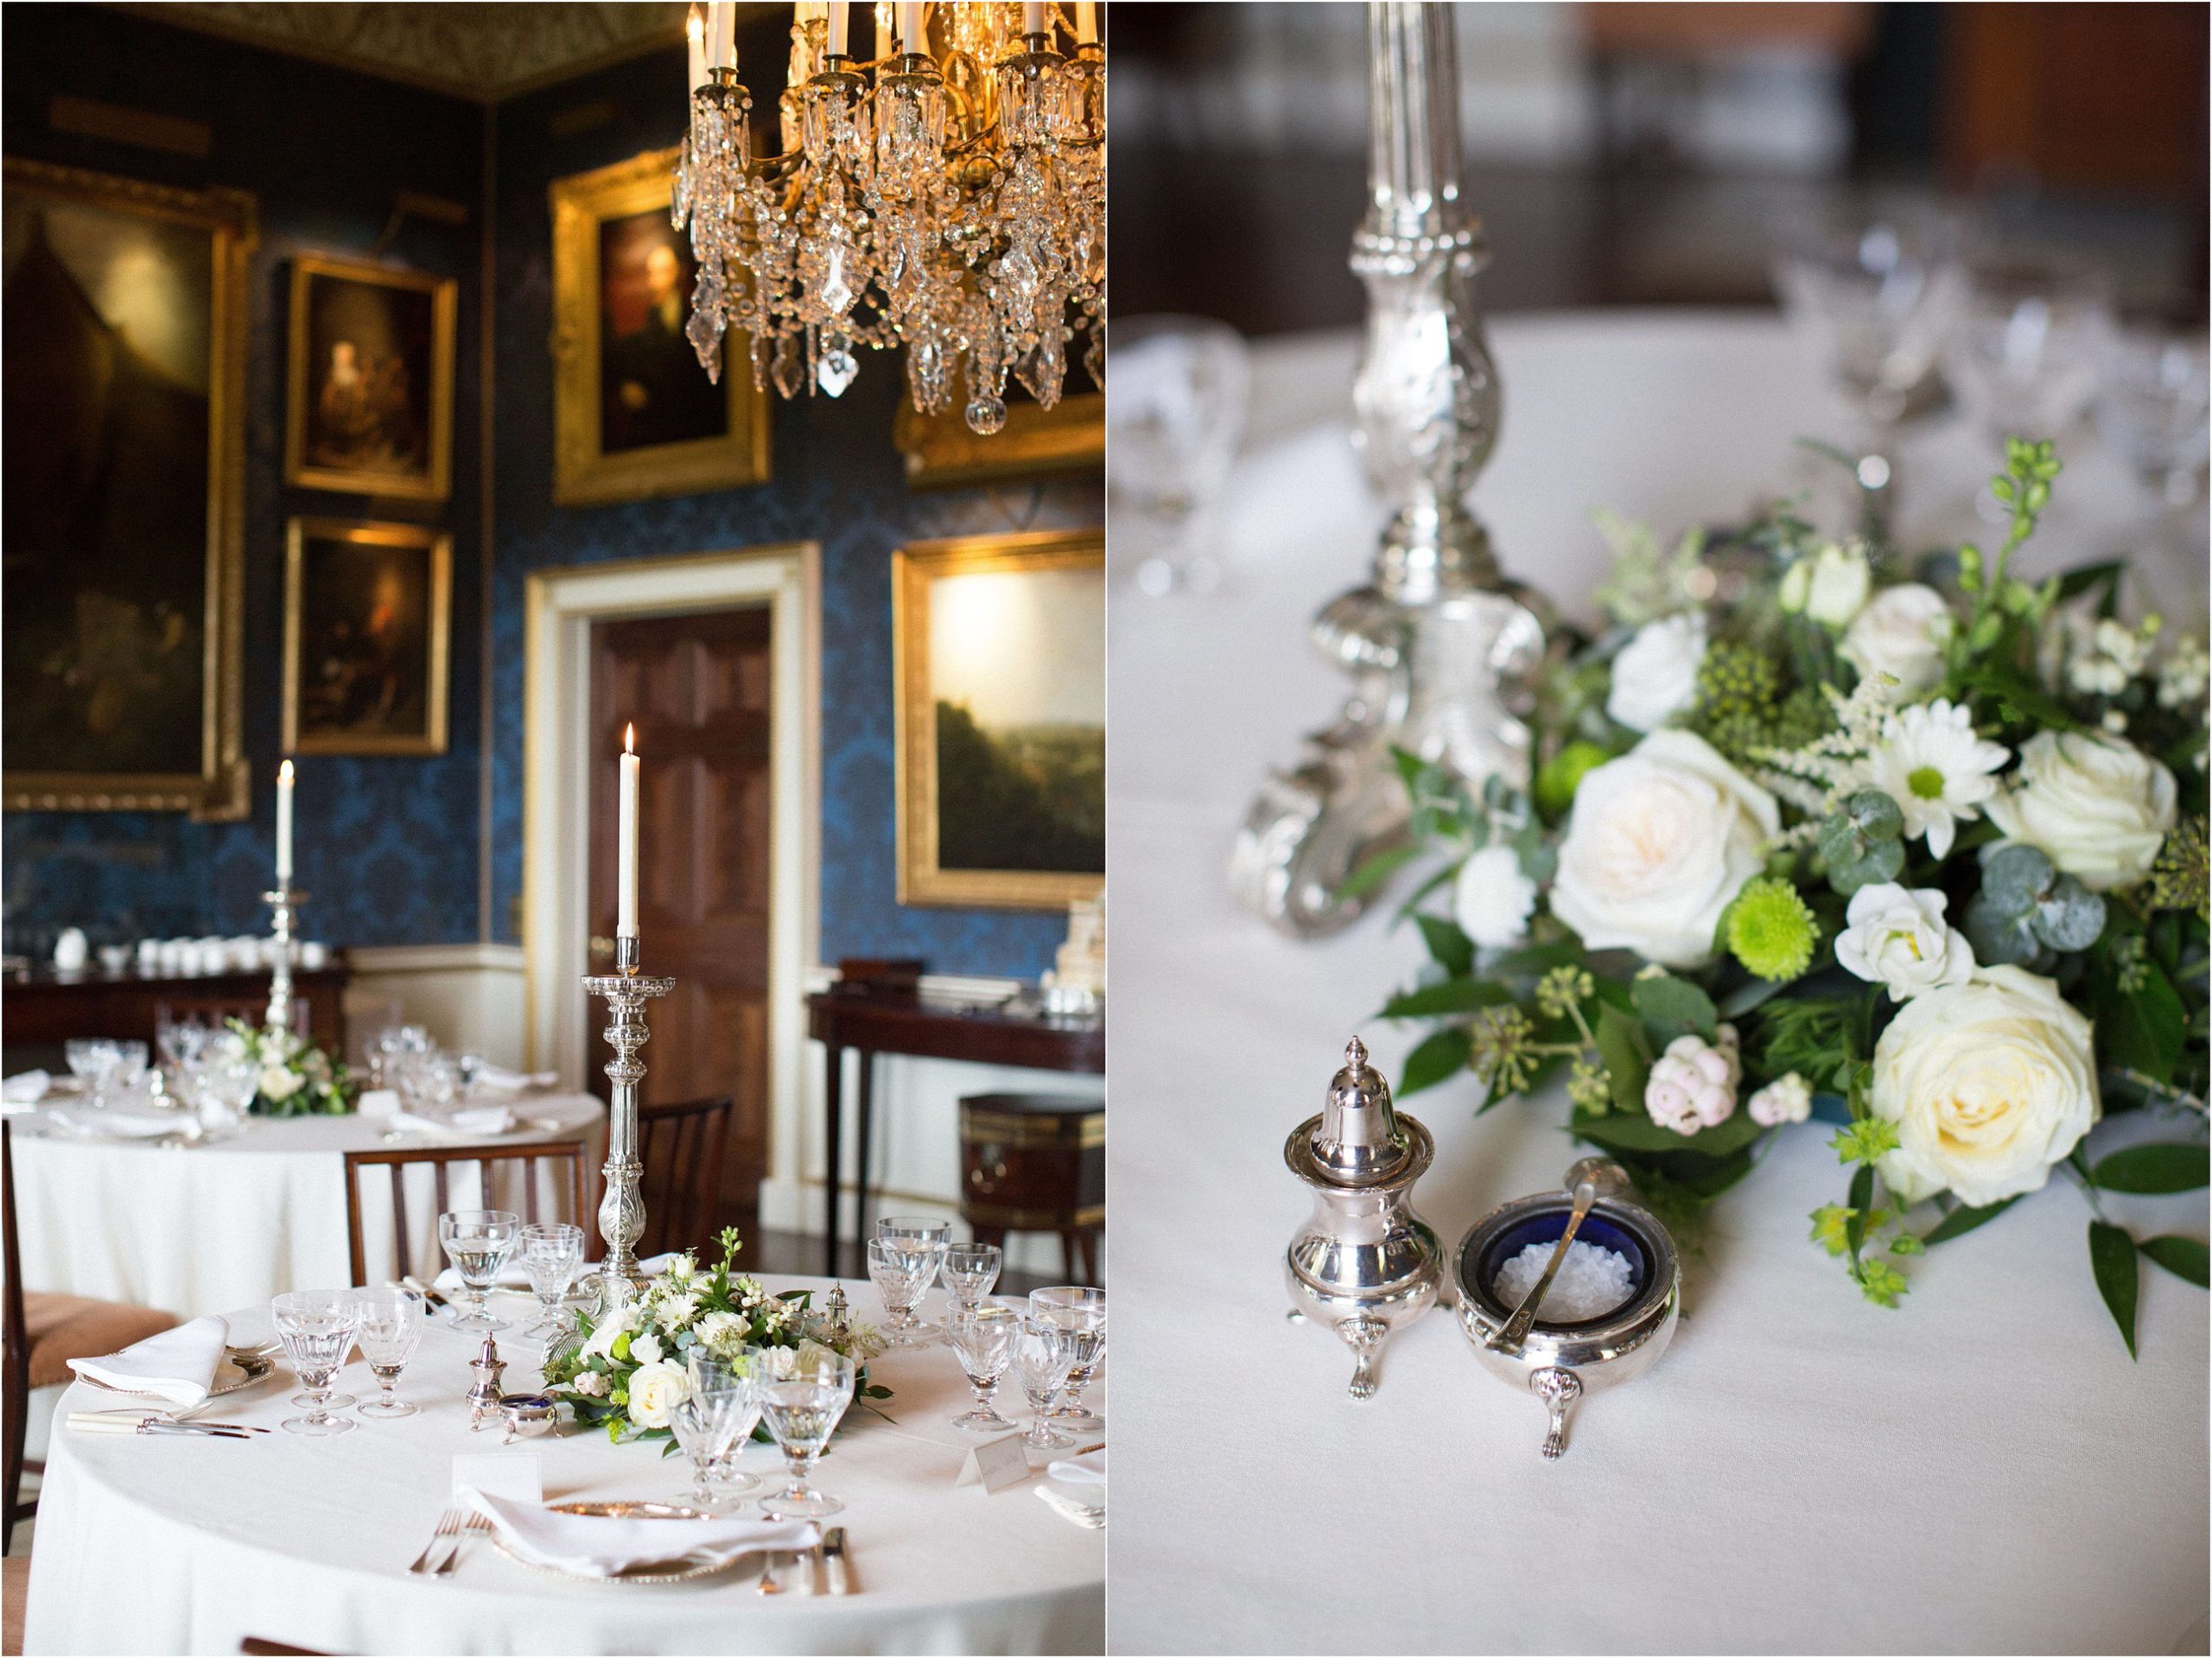 Wedding breakfast in dining room at Ugbrooke House